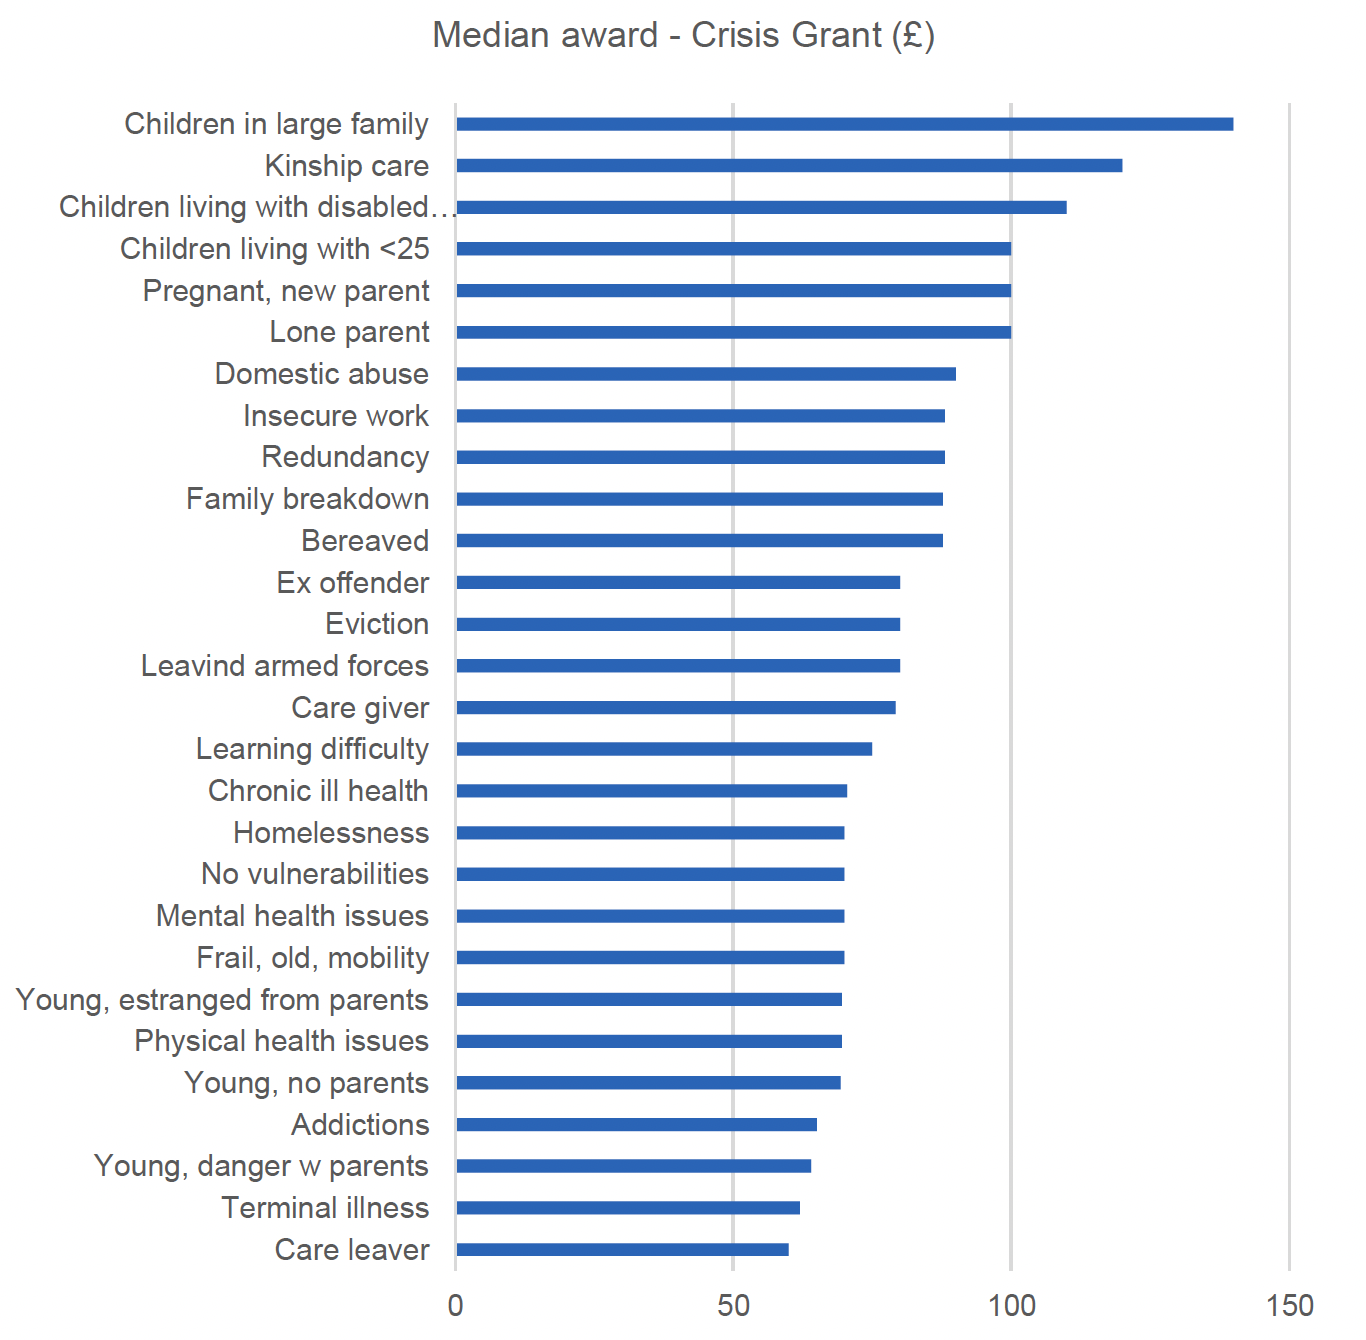 This figure shows the median award level for Crisis Grants by type of vulnerability for 2019/20. The main trends are described in the text. 